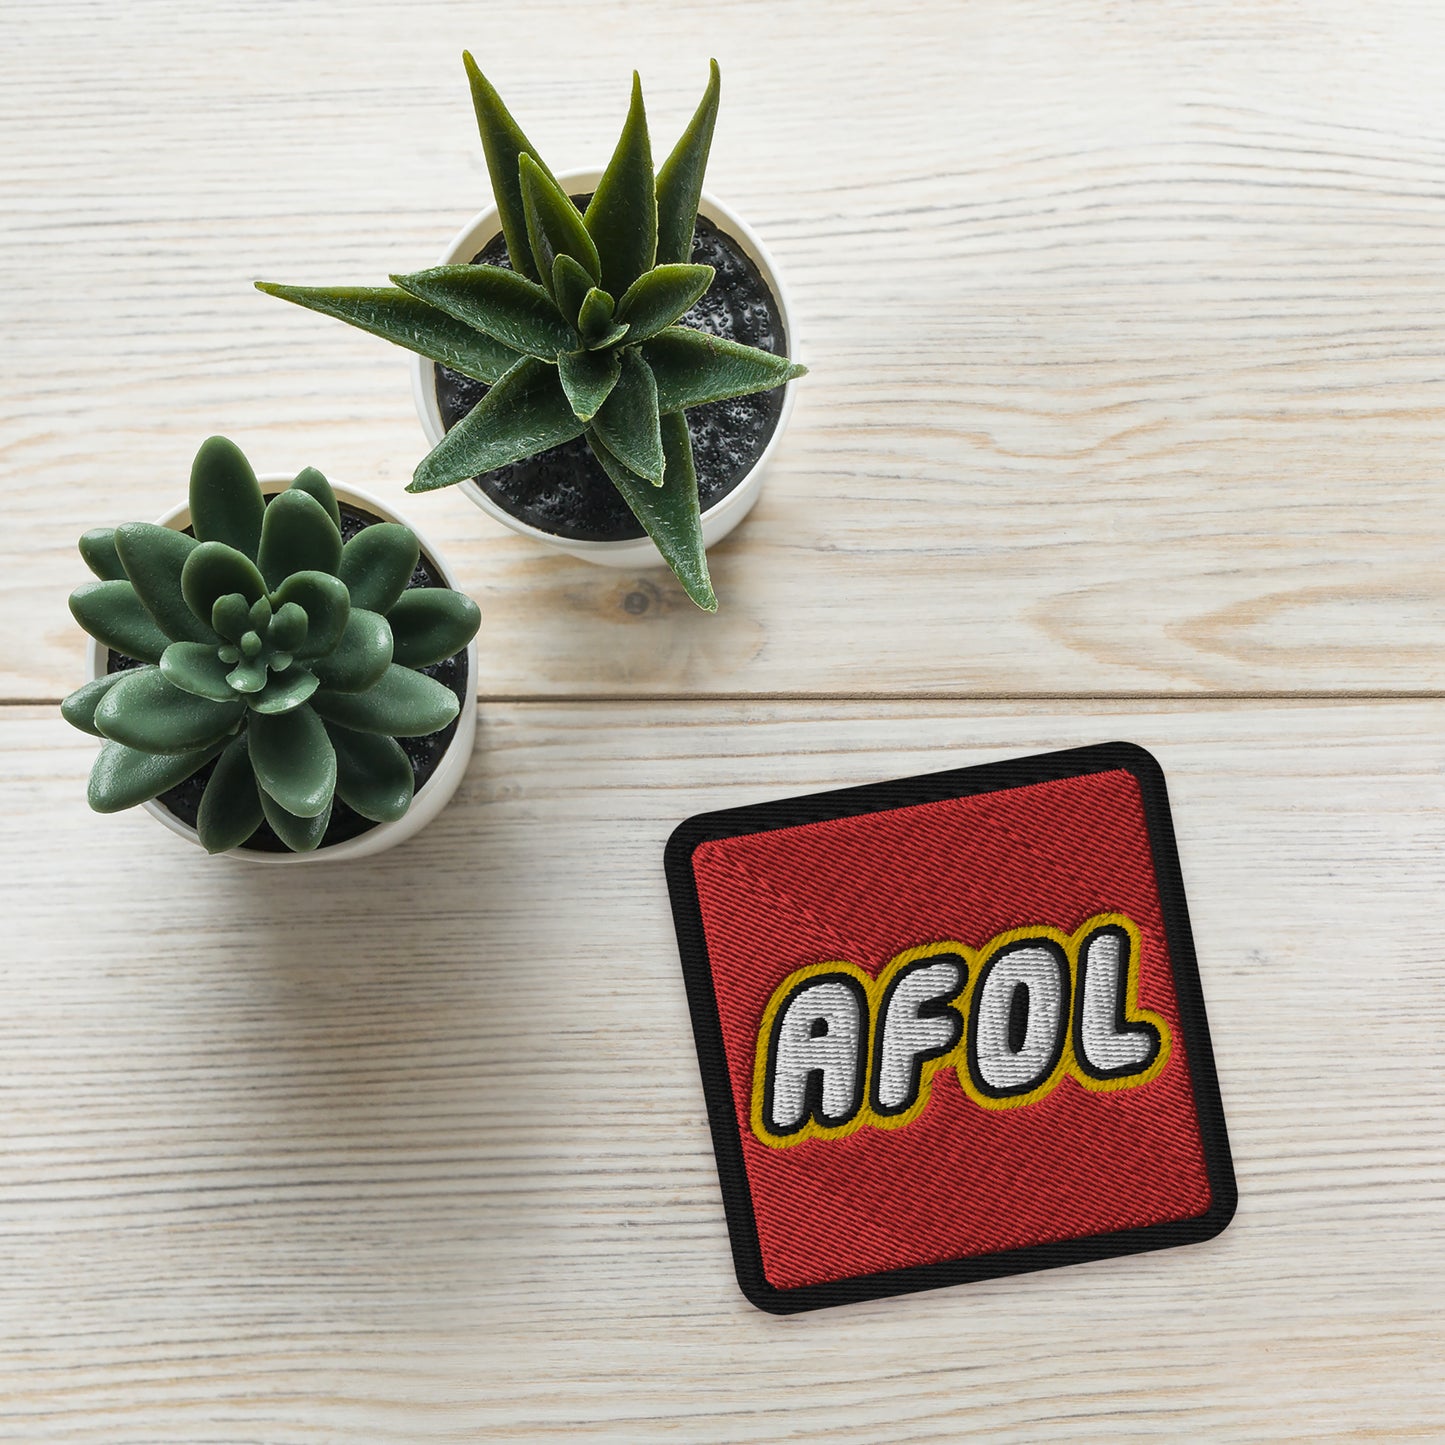 AFOL (Adult Fan of LEGO) Embroidered Patch